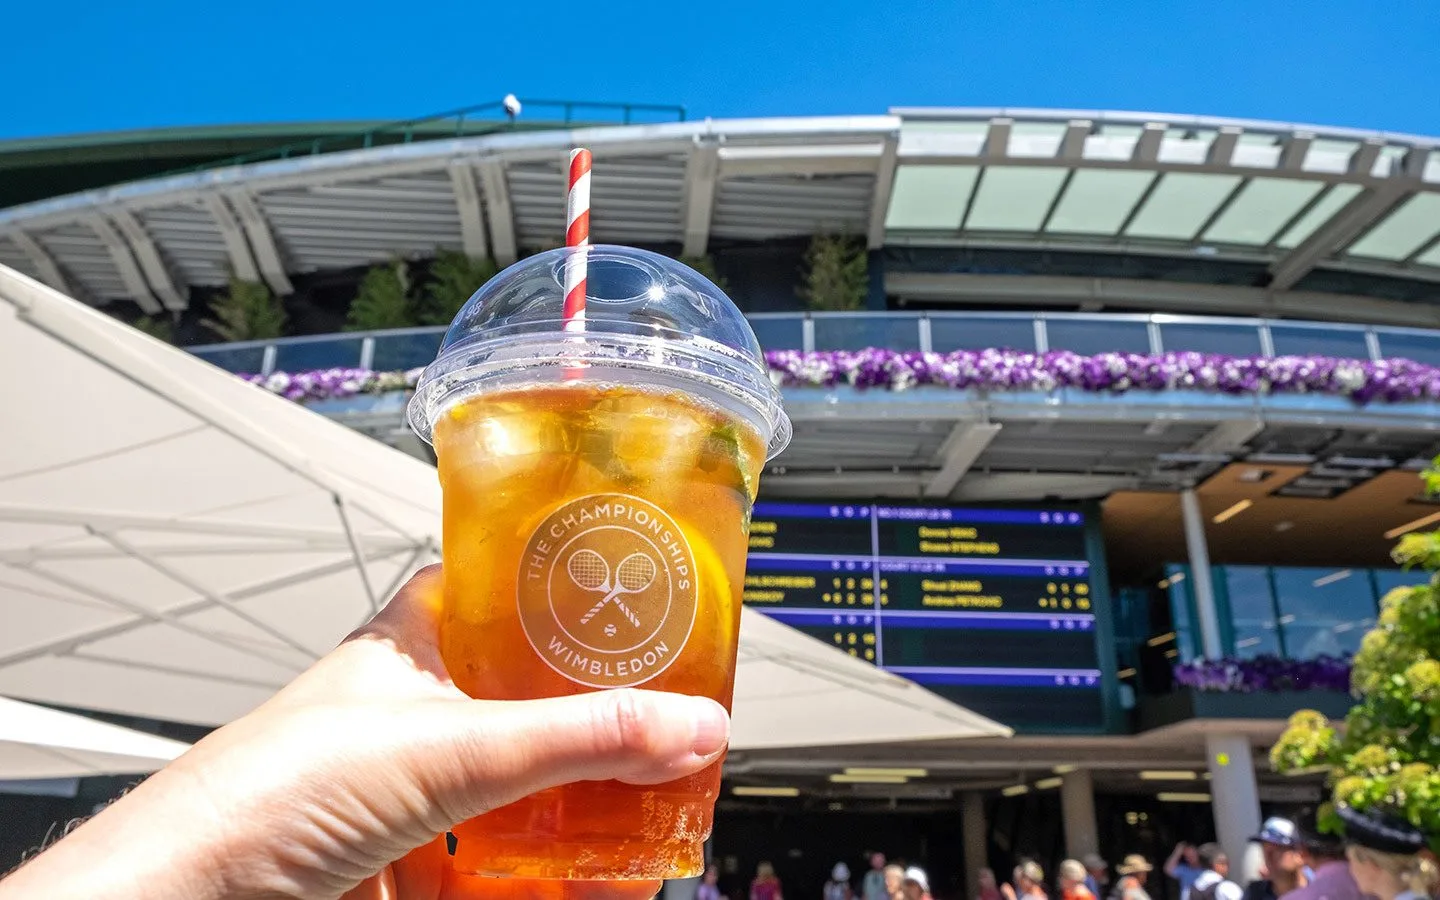 Glass of Pimms at the Wimbledon Tennis Championships